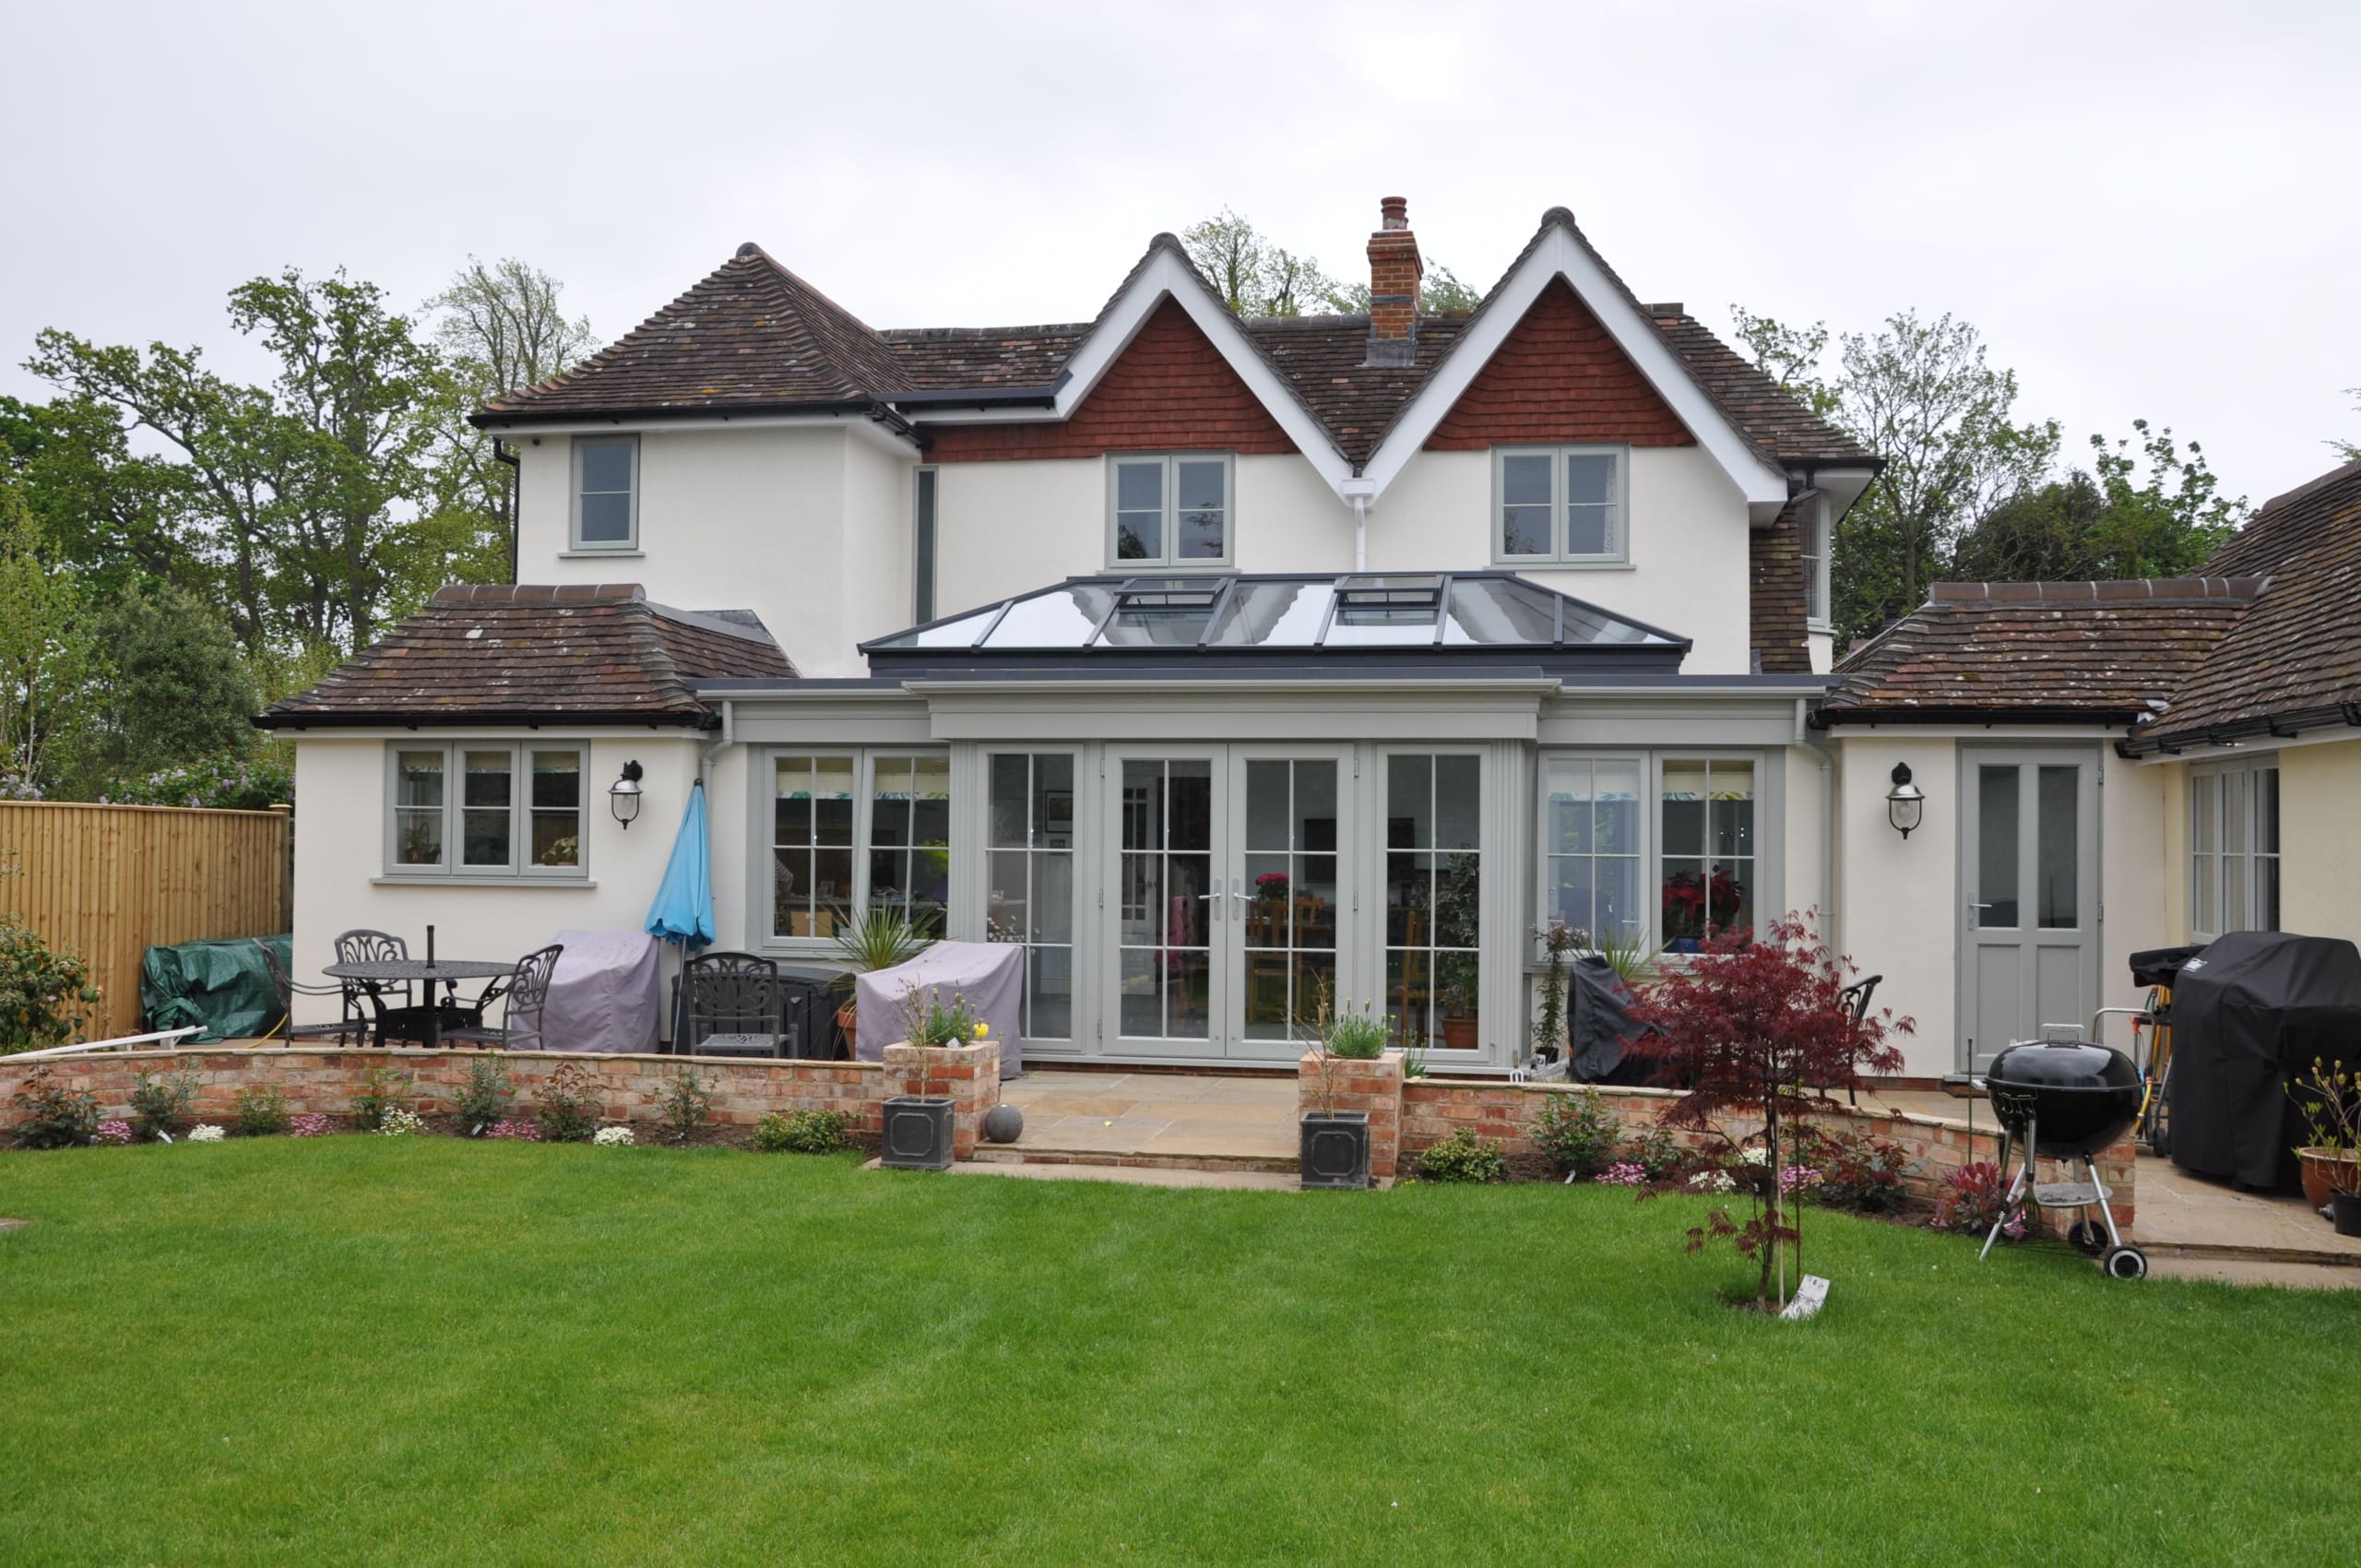 Substantial home with orangery extension and roof lantern.